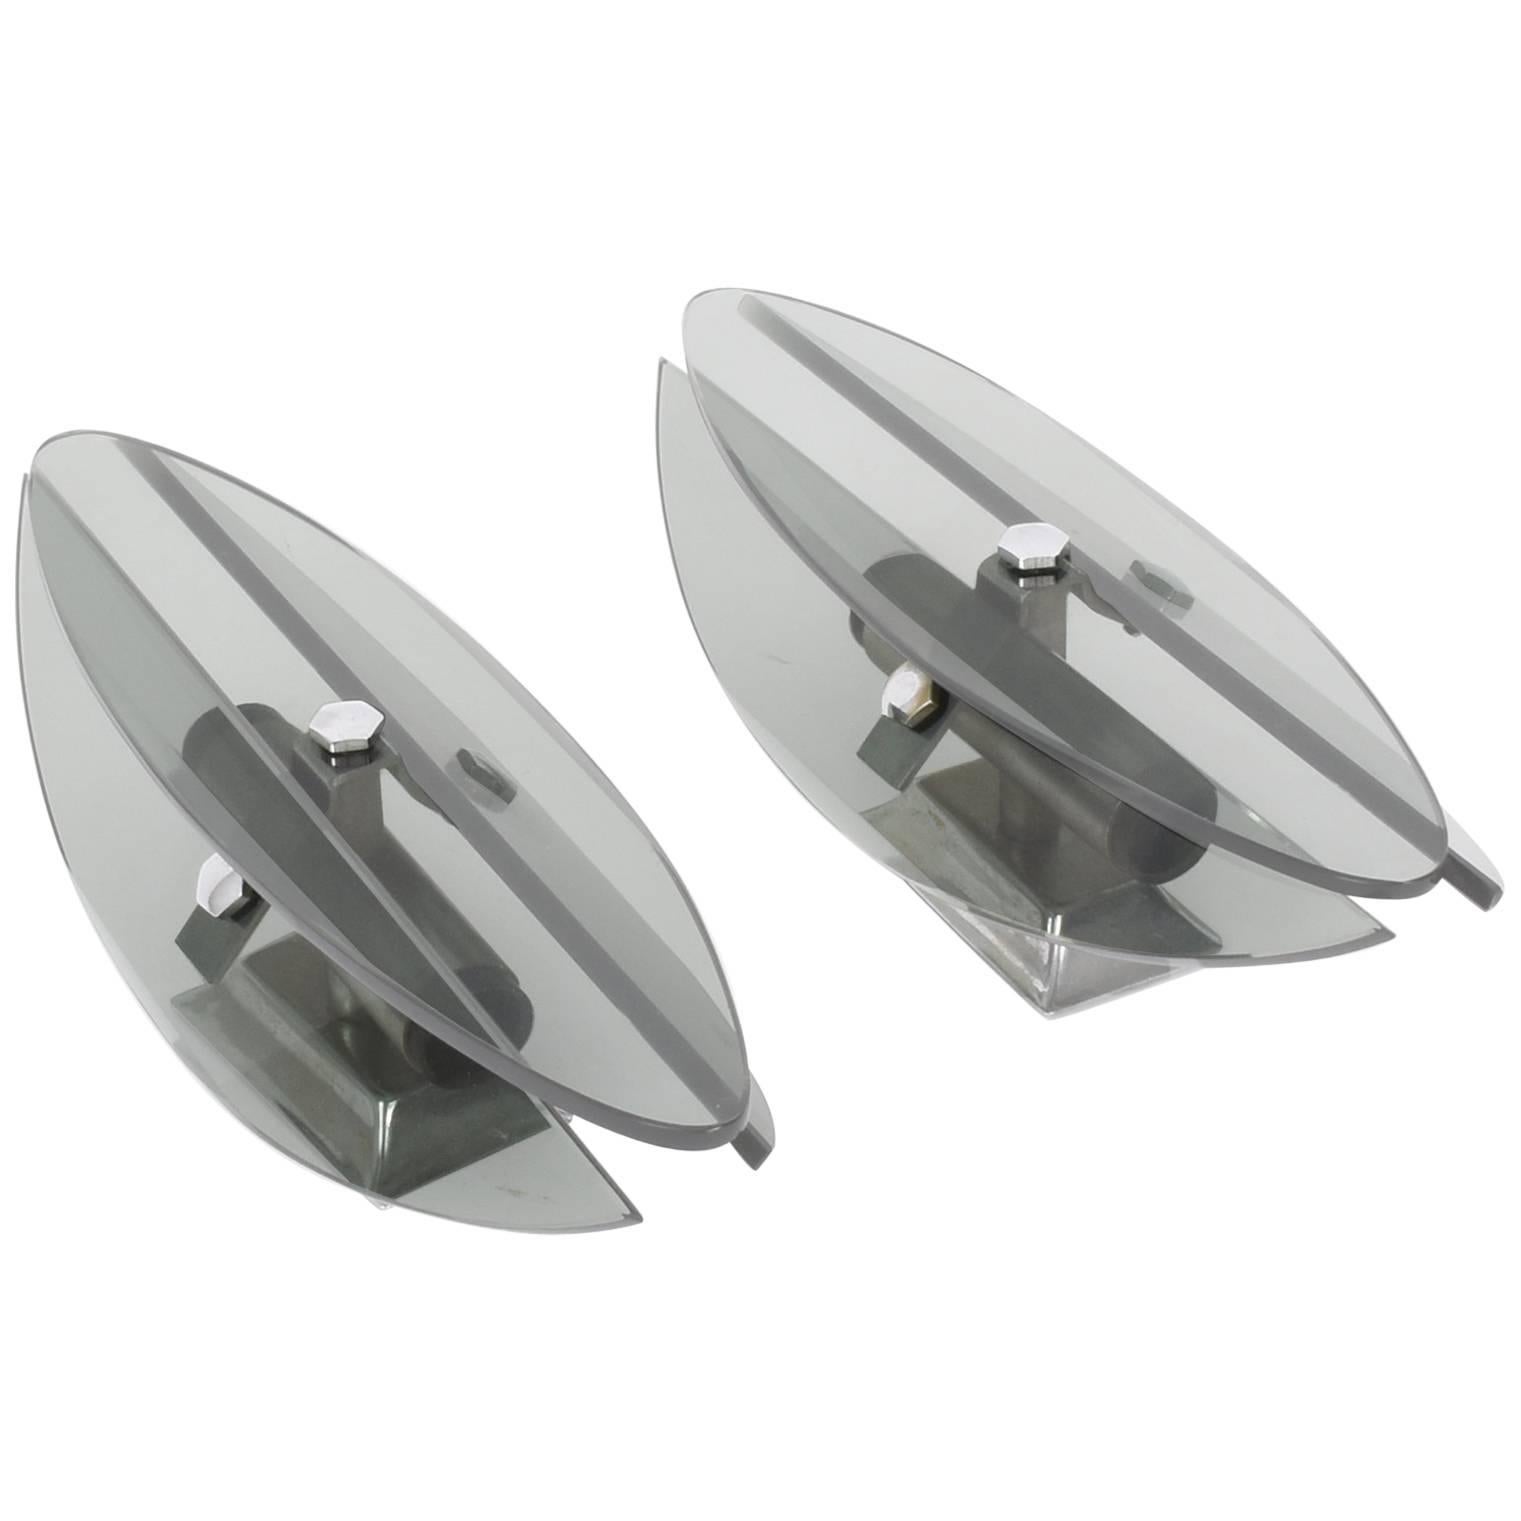 Modernist pair of midcentury elliptical wall sconces by Veca, Italy. This lovely sconces were produced by Veca in Italy during the 1960s.

These sconces are made of shielding smoked glass and chrome, who reinforce their futuristic design. In amazing